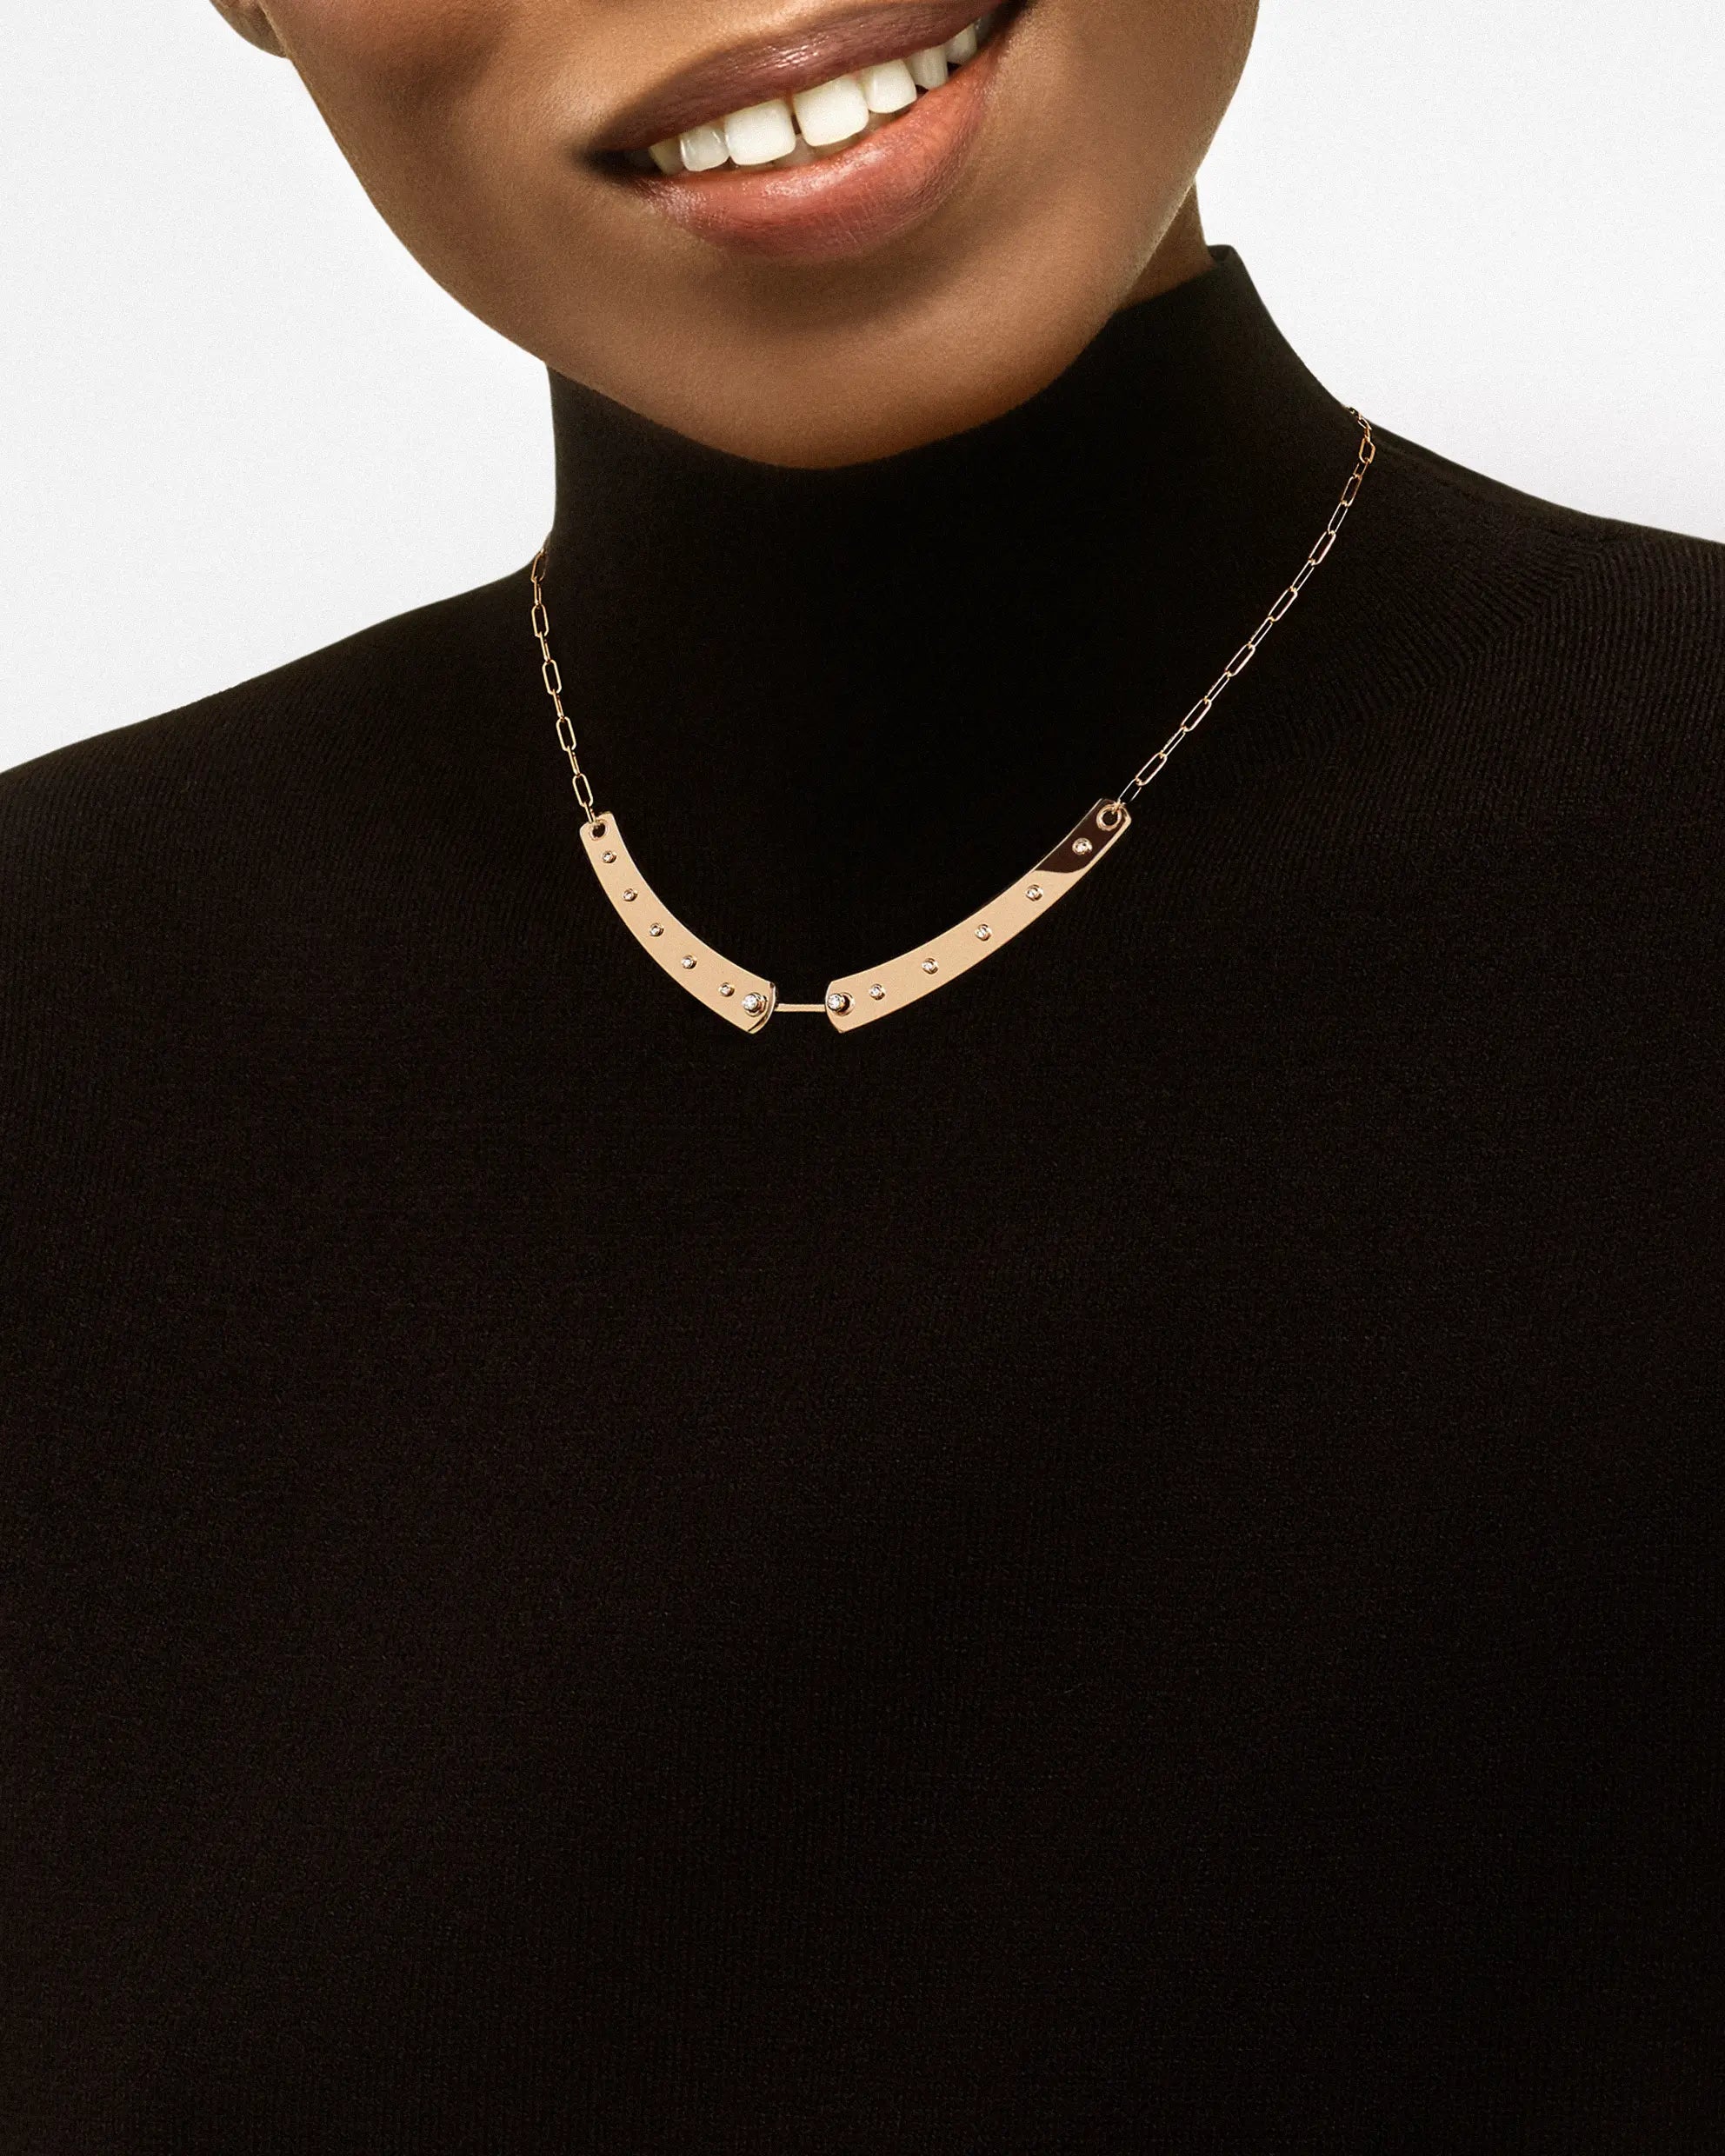 files/Mood_Necklace_Brunch-In-NY_RG_Model_NH61012_2a168ac0-f105-4a86-b07c-a8f72ea3c848.webp - Nouvel Heritage